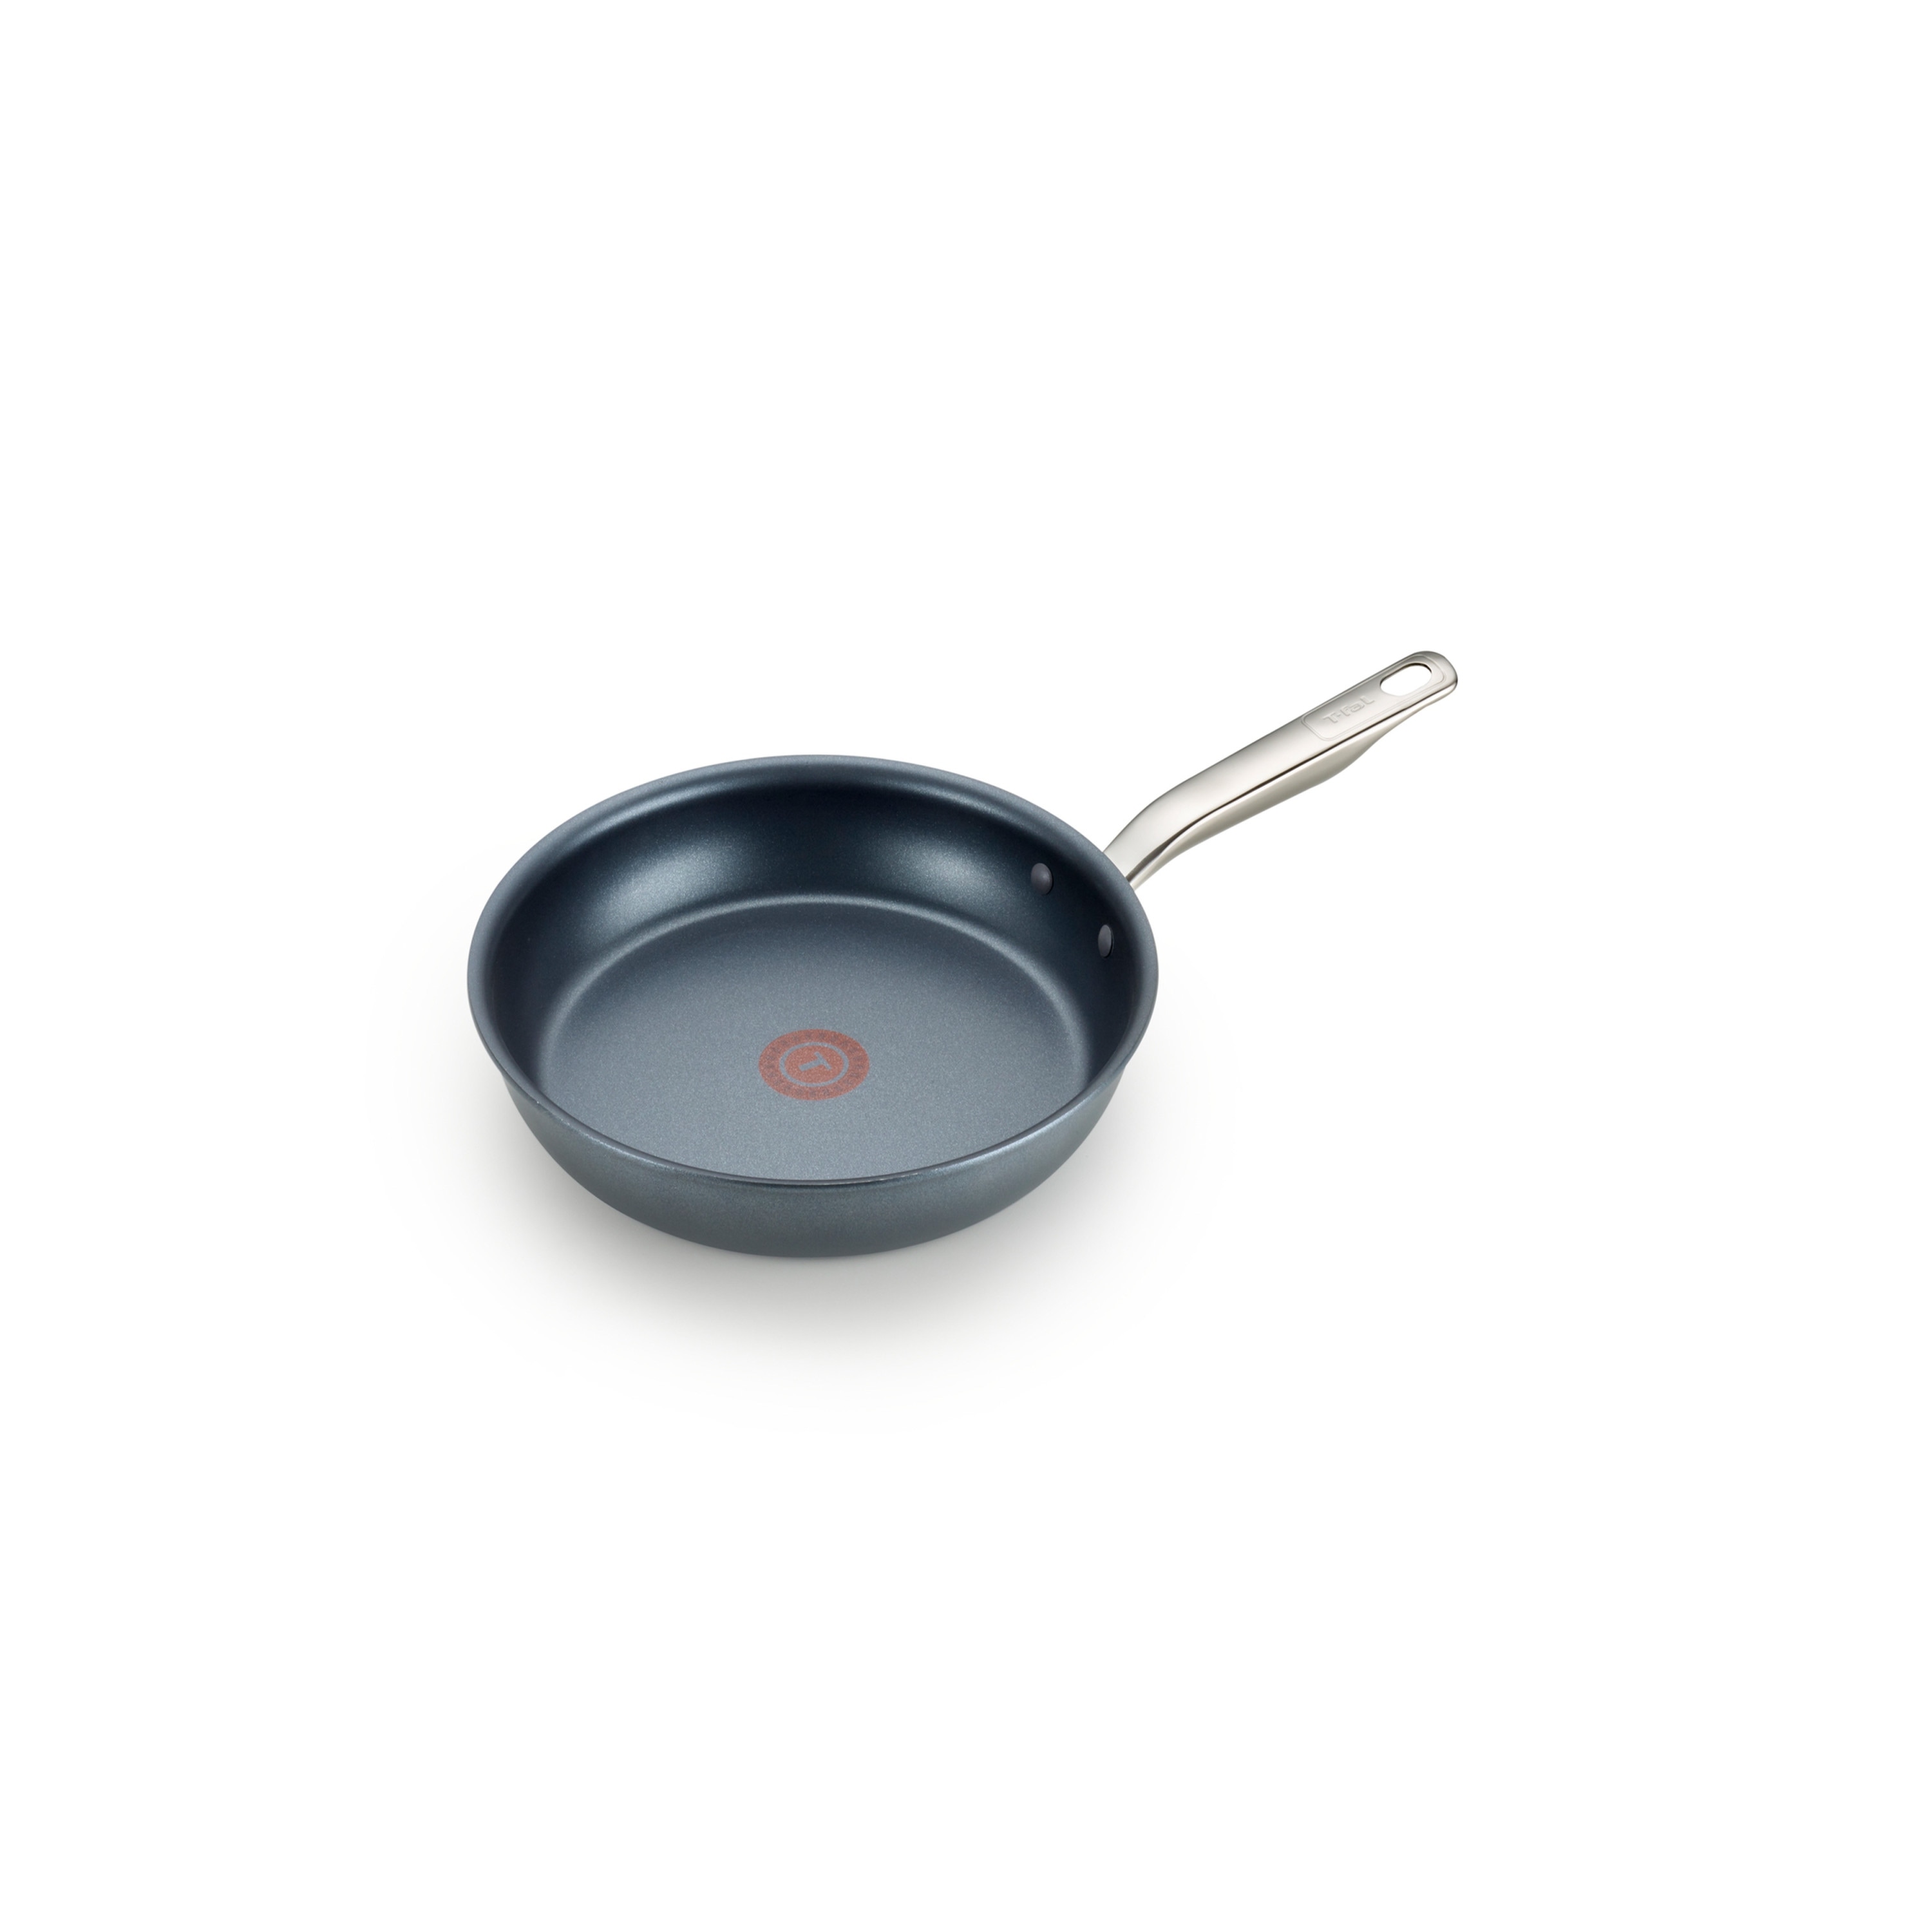 https://ak1.ostkcdn.com/images/products/is/images/direct/c865970b774d7911e7c05c527cc1a25b07de690d/T-fal-Platinum-Nonstick-12-inch-Fry-Pan%2C-Endurance-Collection.jpg